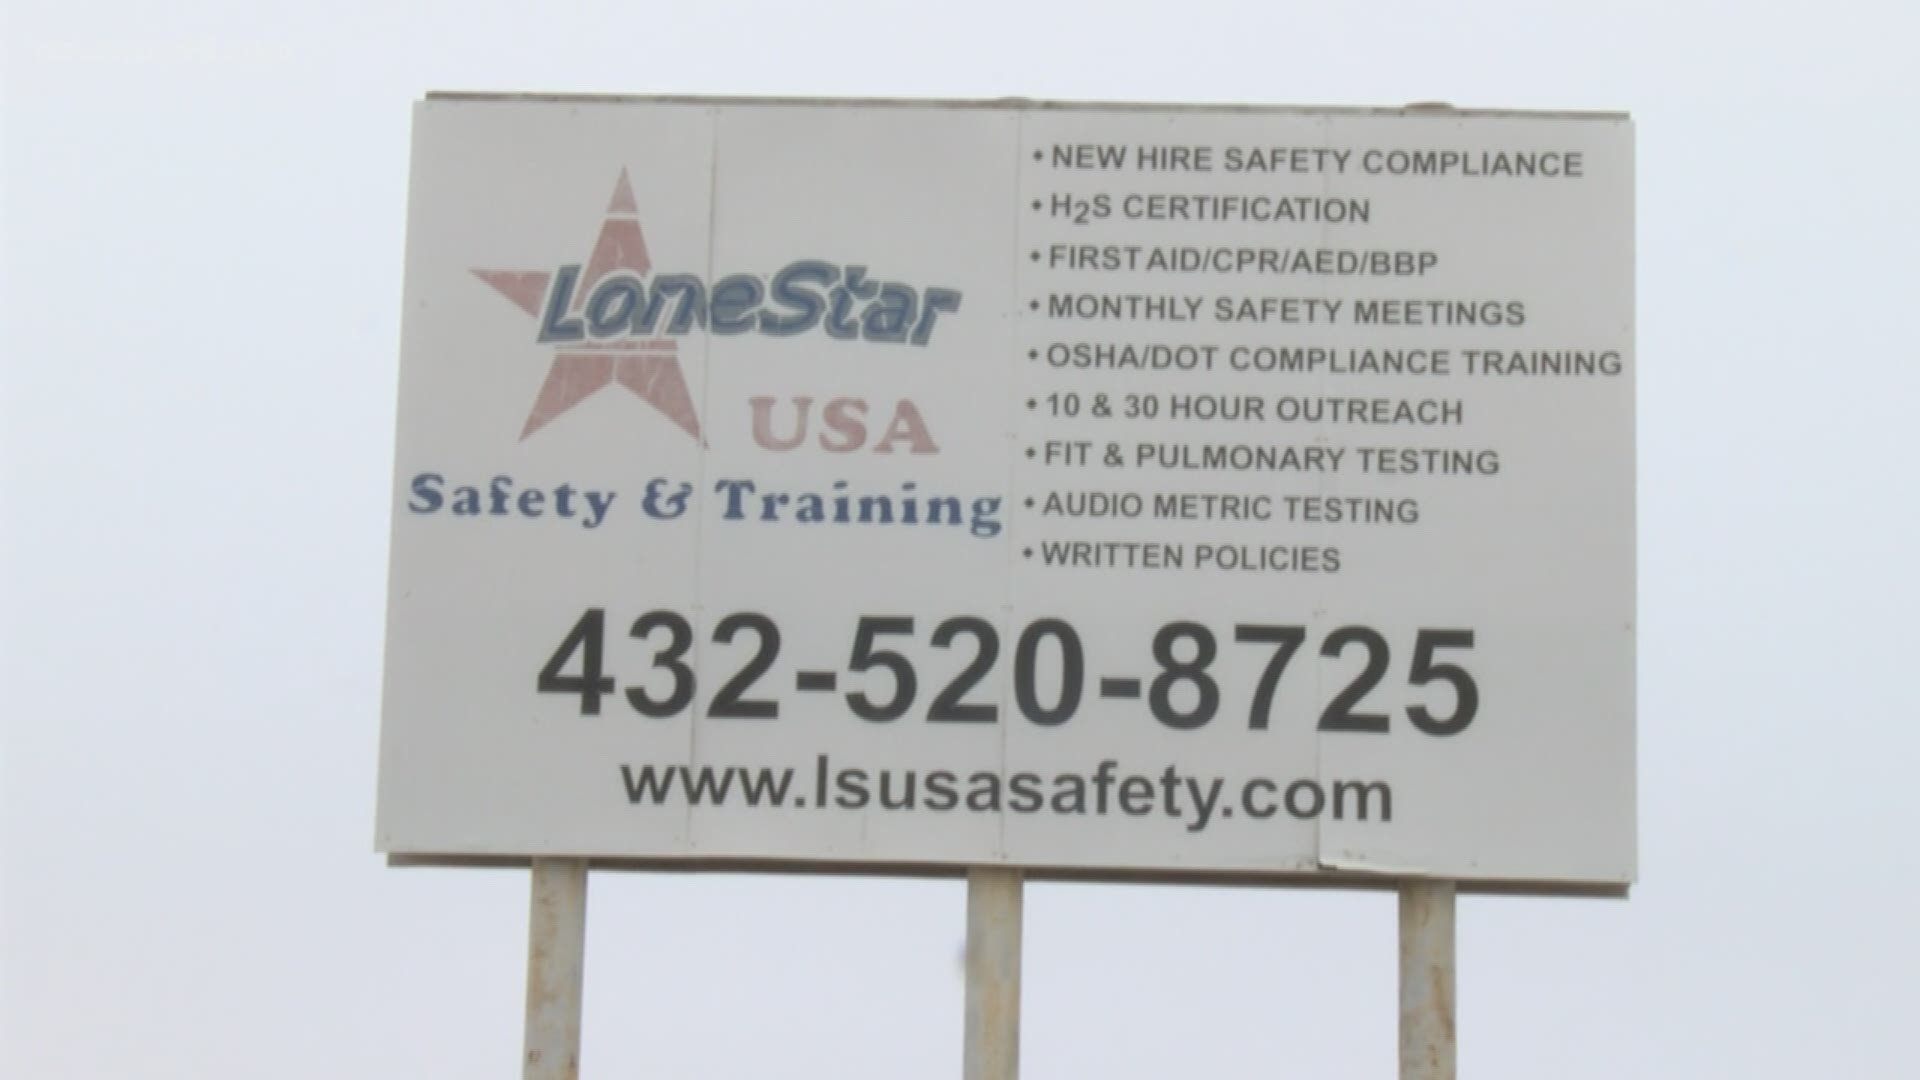 The company provides certification on Texas Railroad Commission regulations